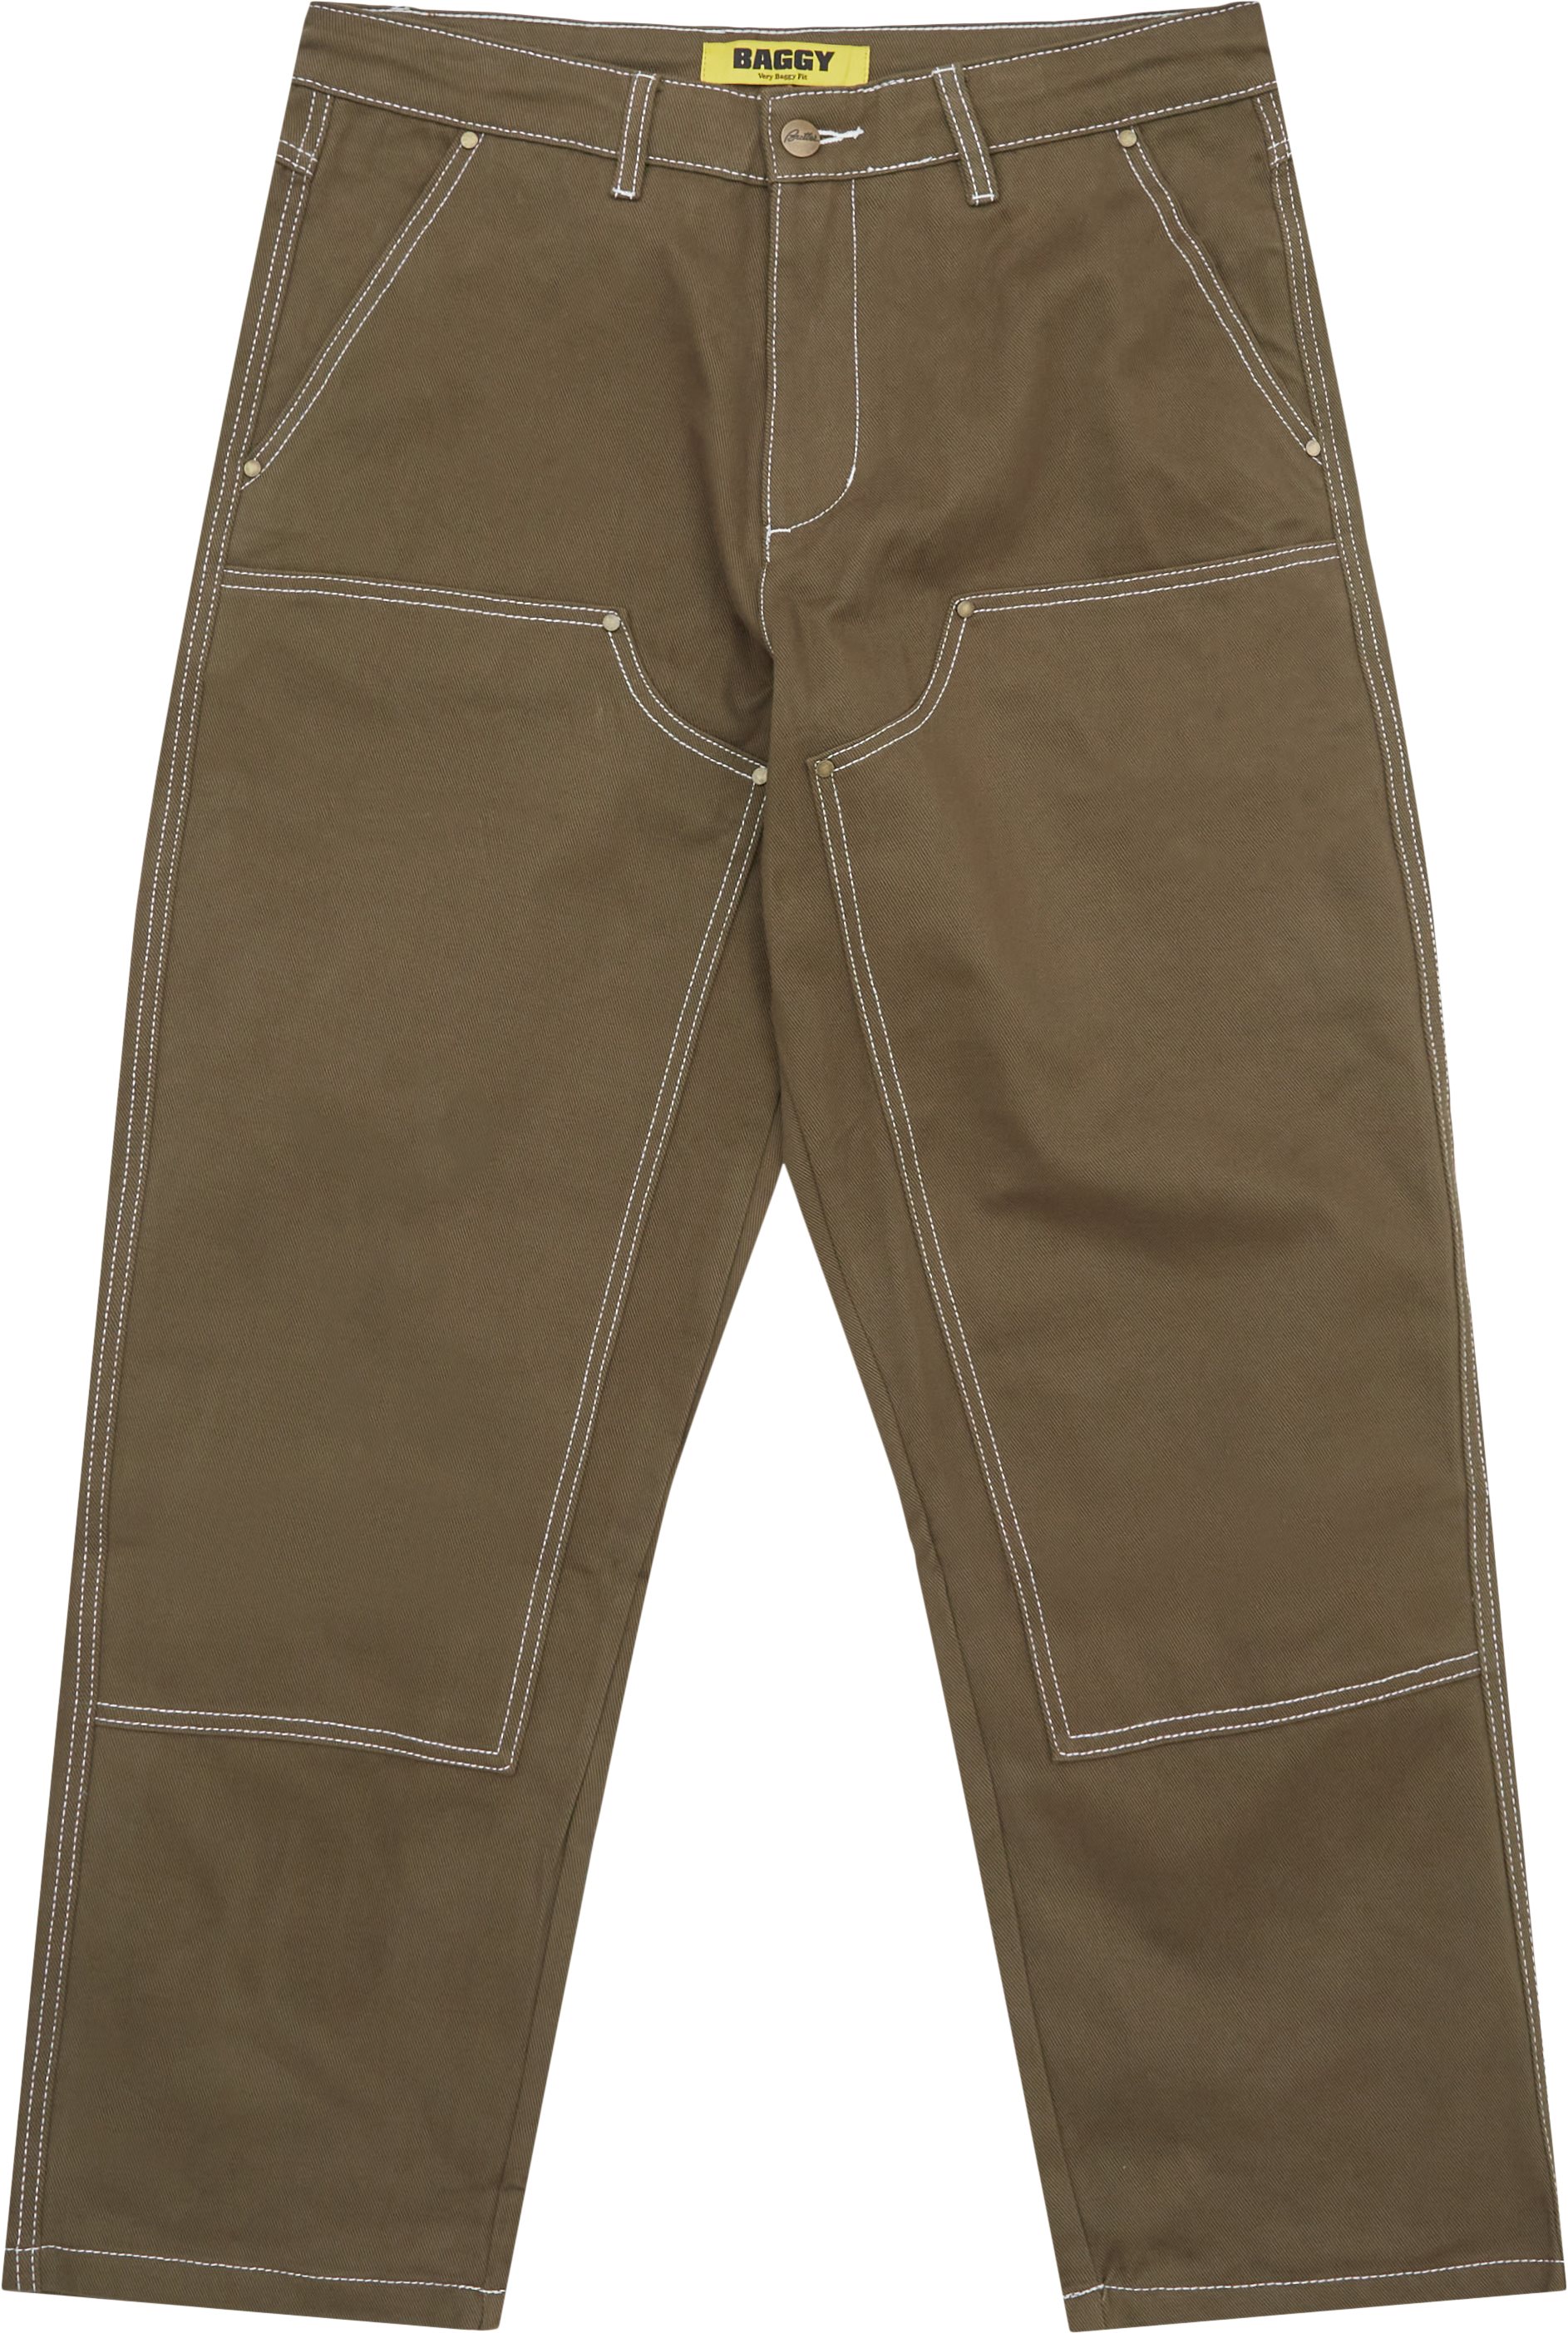 Butter Goods Bukser DOUBLE KNEE PANTS Army